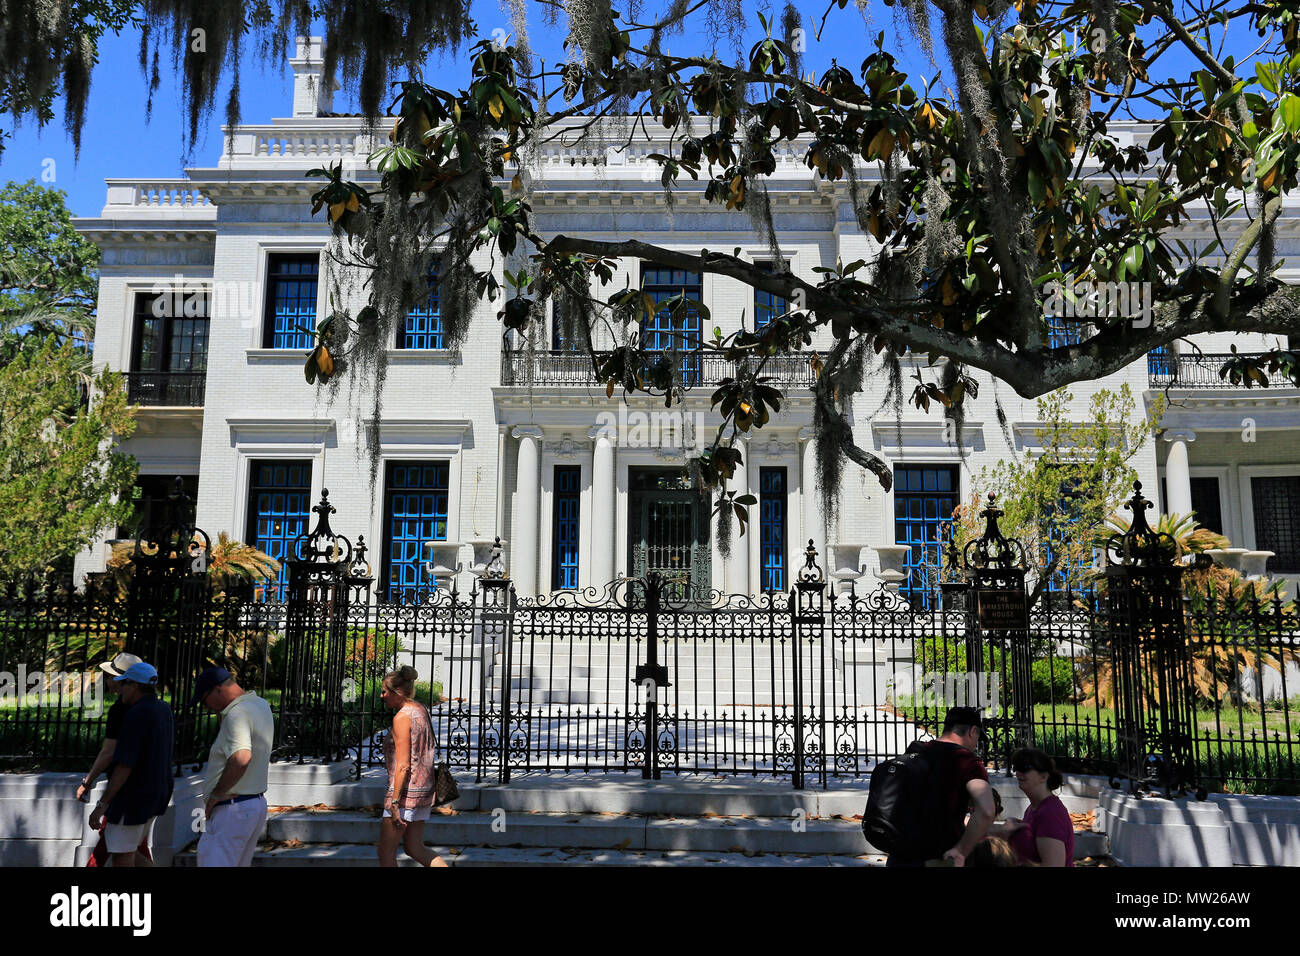 Armstrong house is a 100 year old, four story mansion in the city of Savannah, Georgia, USA Stock Photo